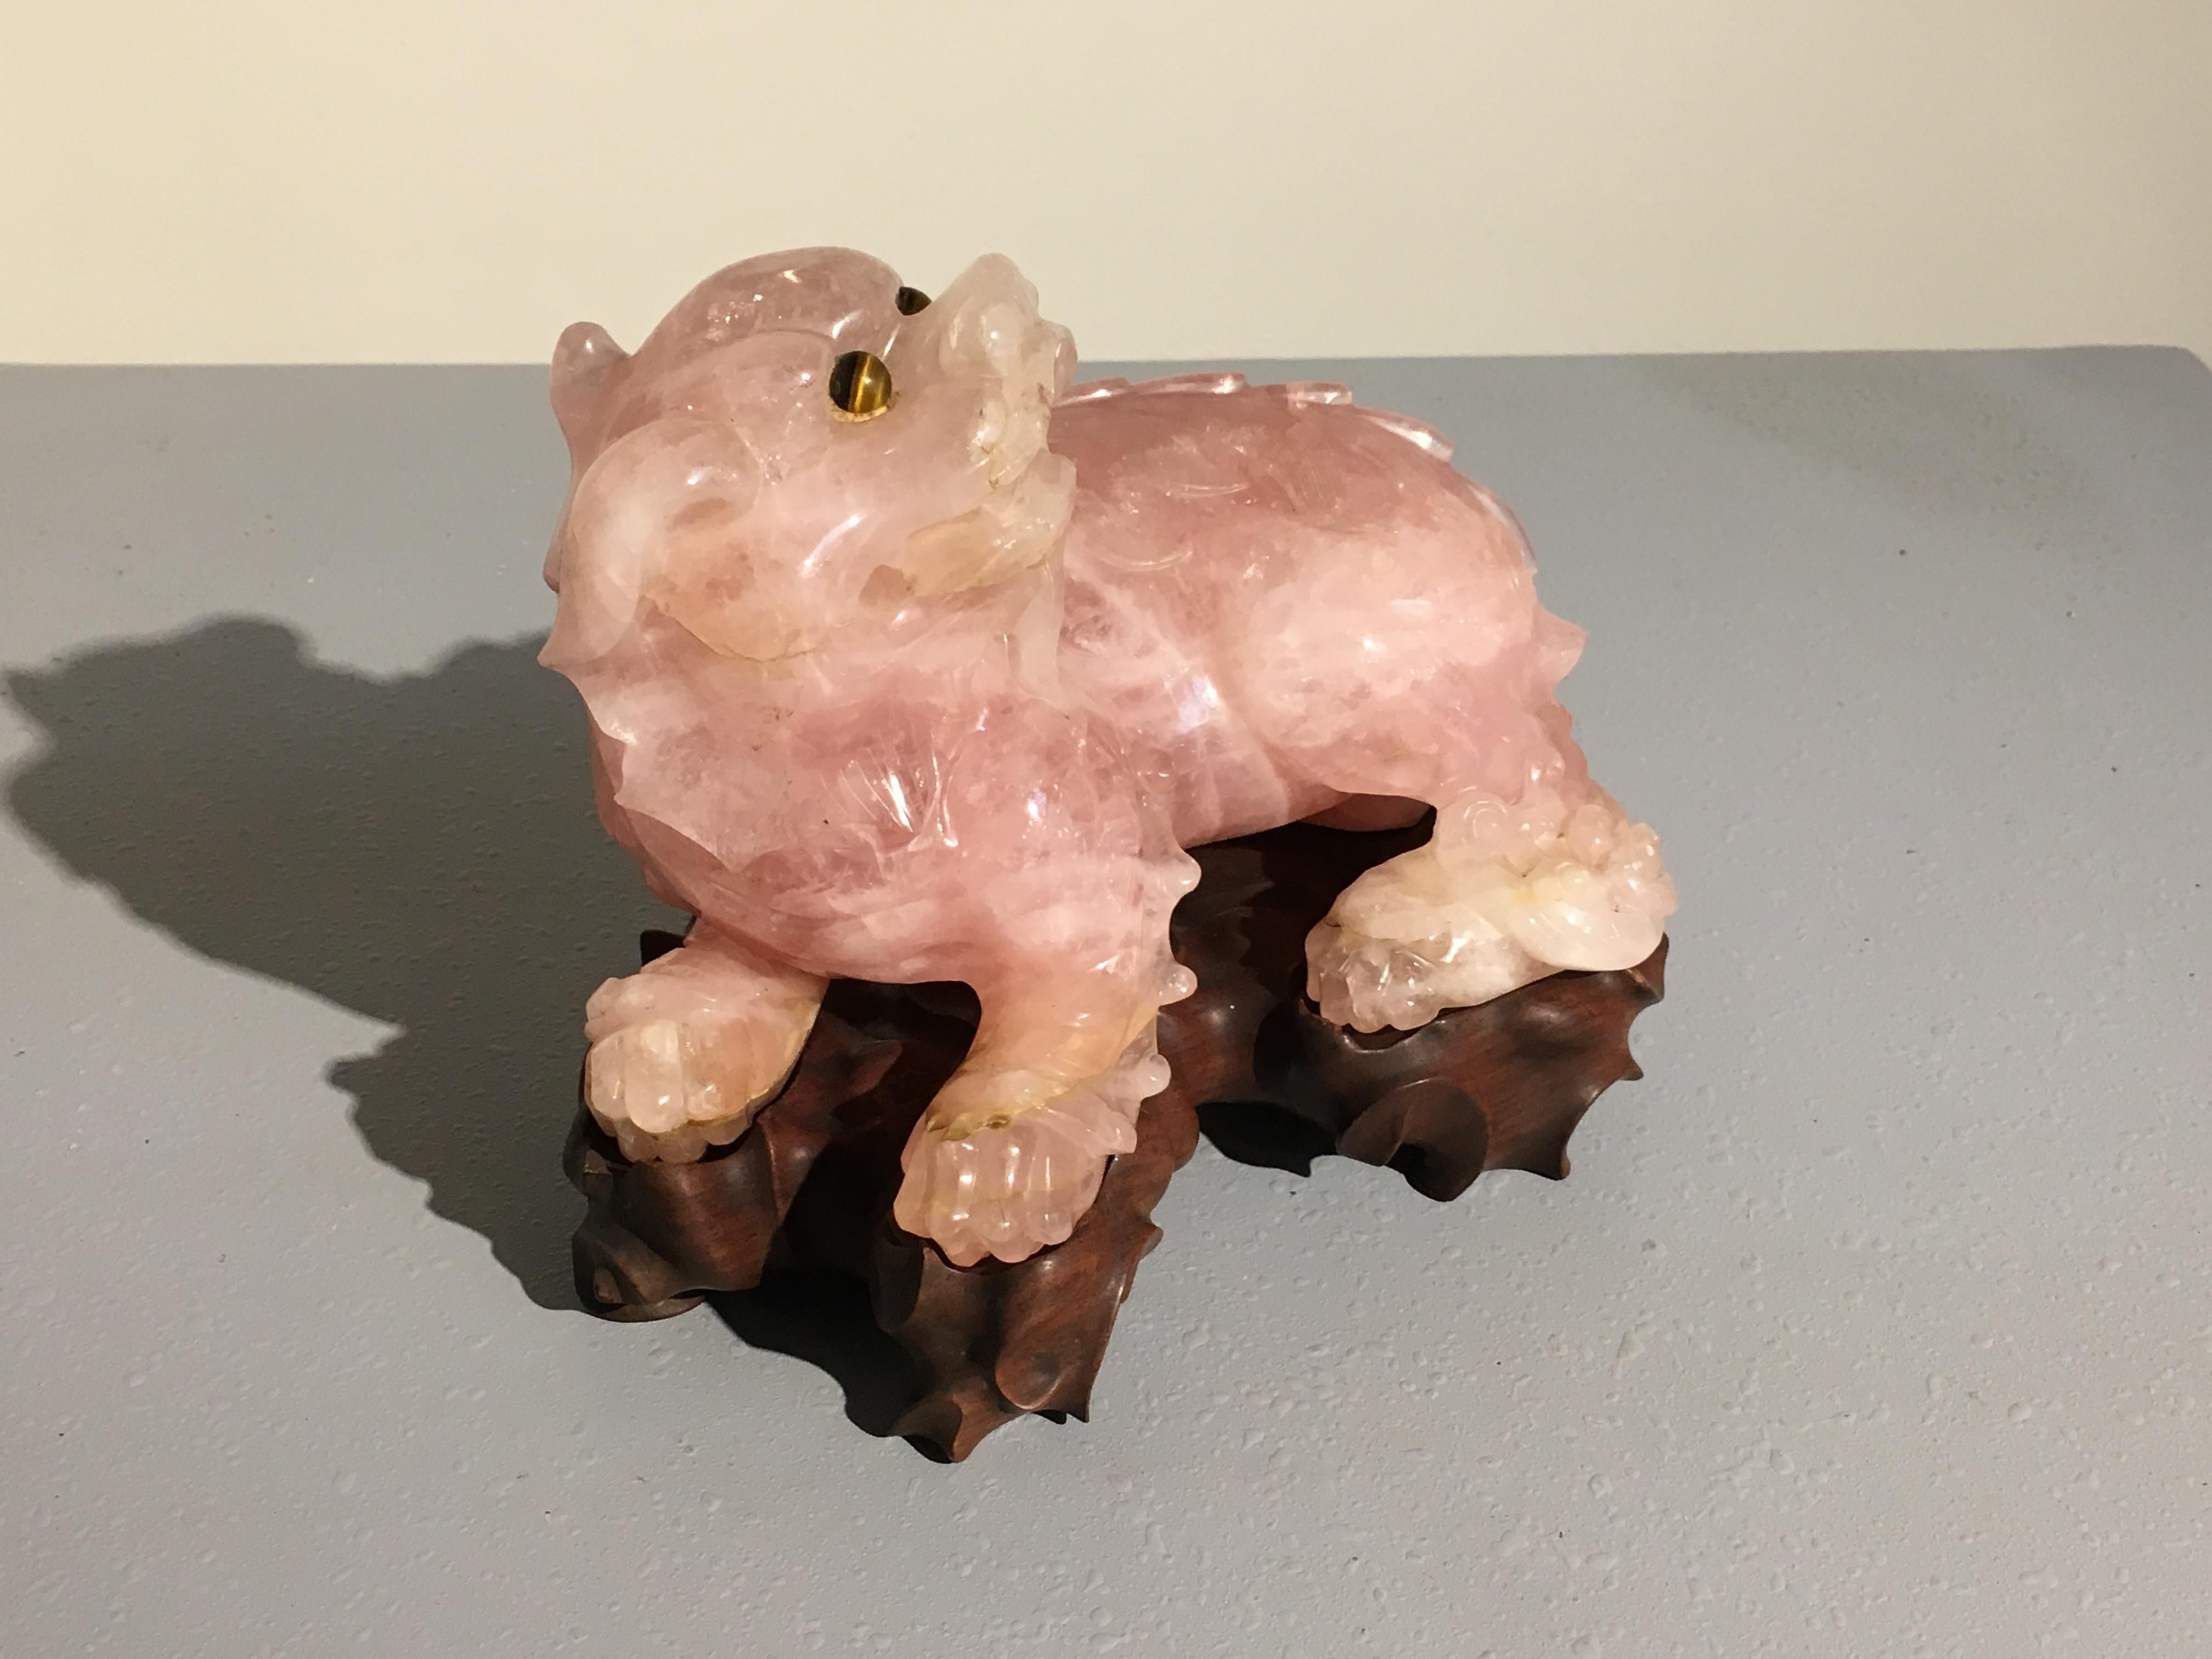 Chinese Republic Period carved rose quartz foo lion with tiger eye eyes, circa 1930s, China.

The foo lion, also known as a foo dog, is well carved from a single large piece of mottled pink rose quartz. The lion portrayed hunched down in a playful